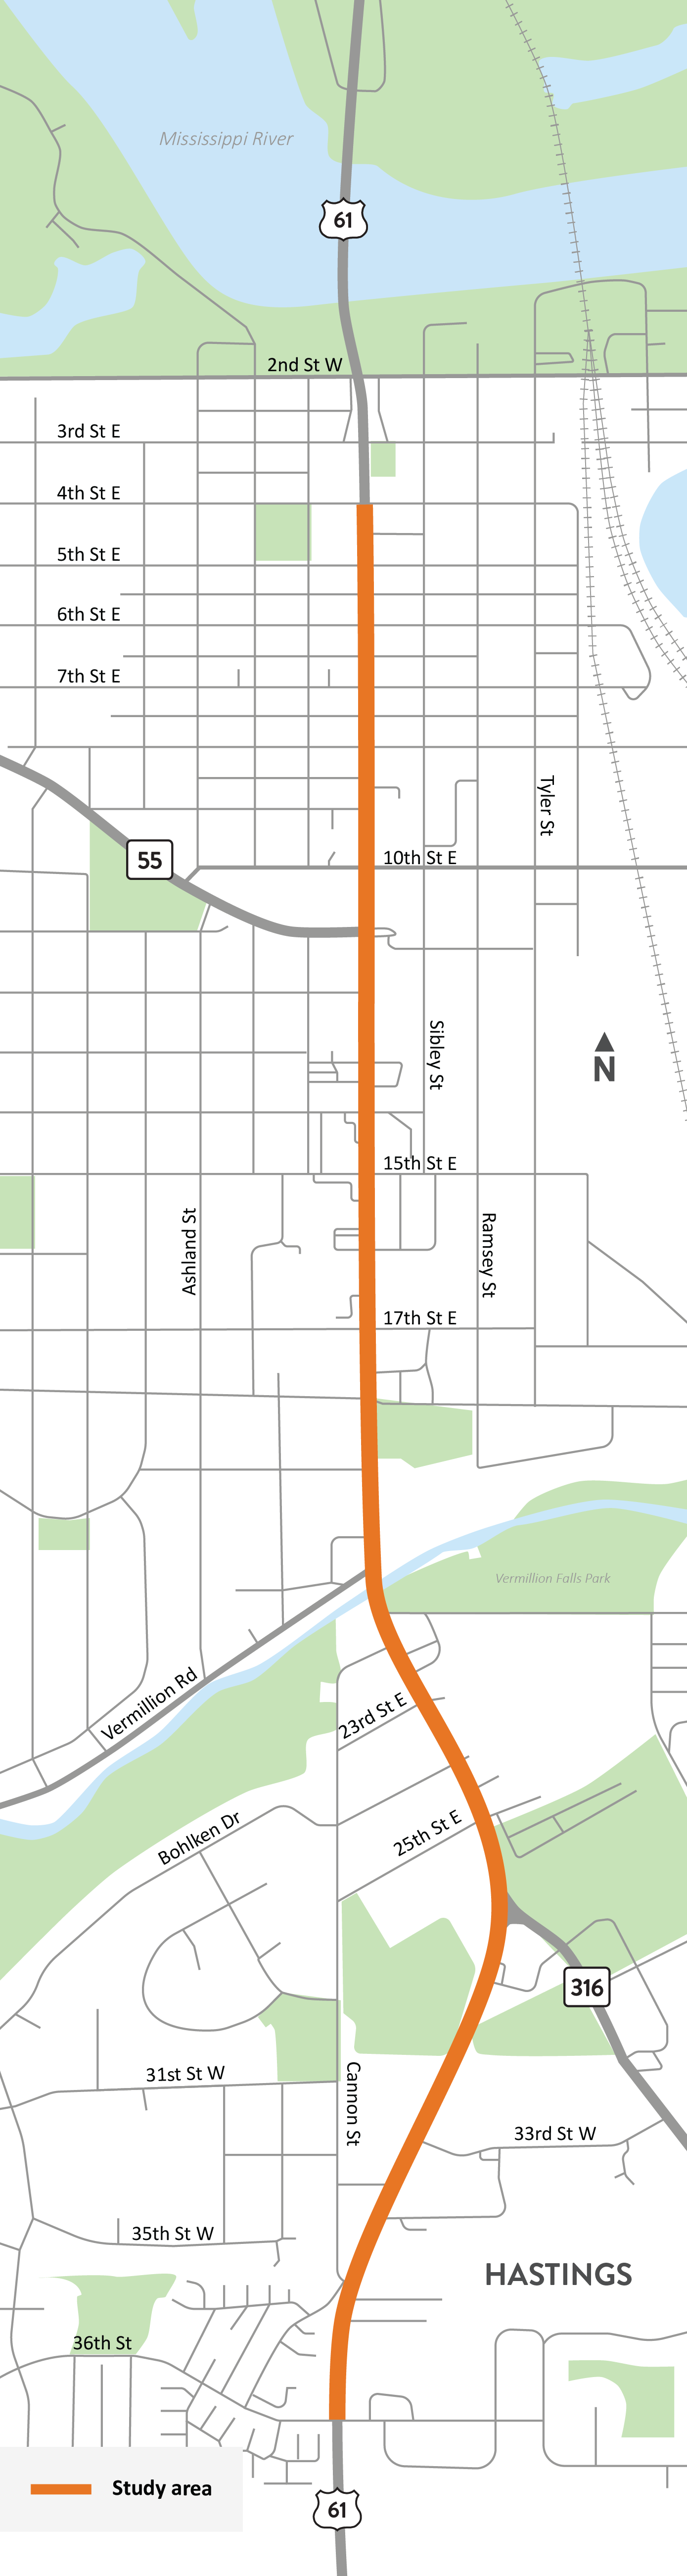 Highway 61 between 4th Street and 36th Street in Hastings study location map